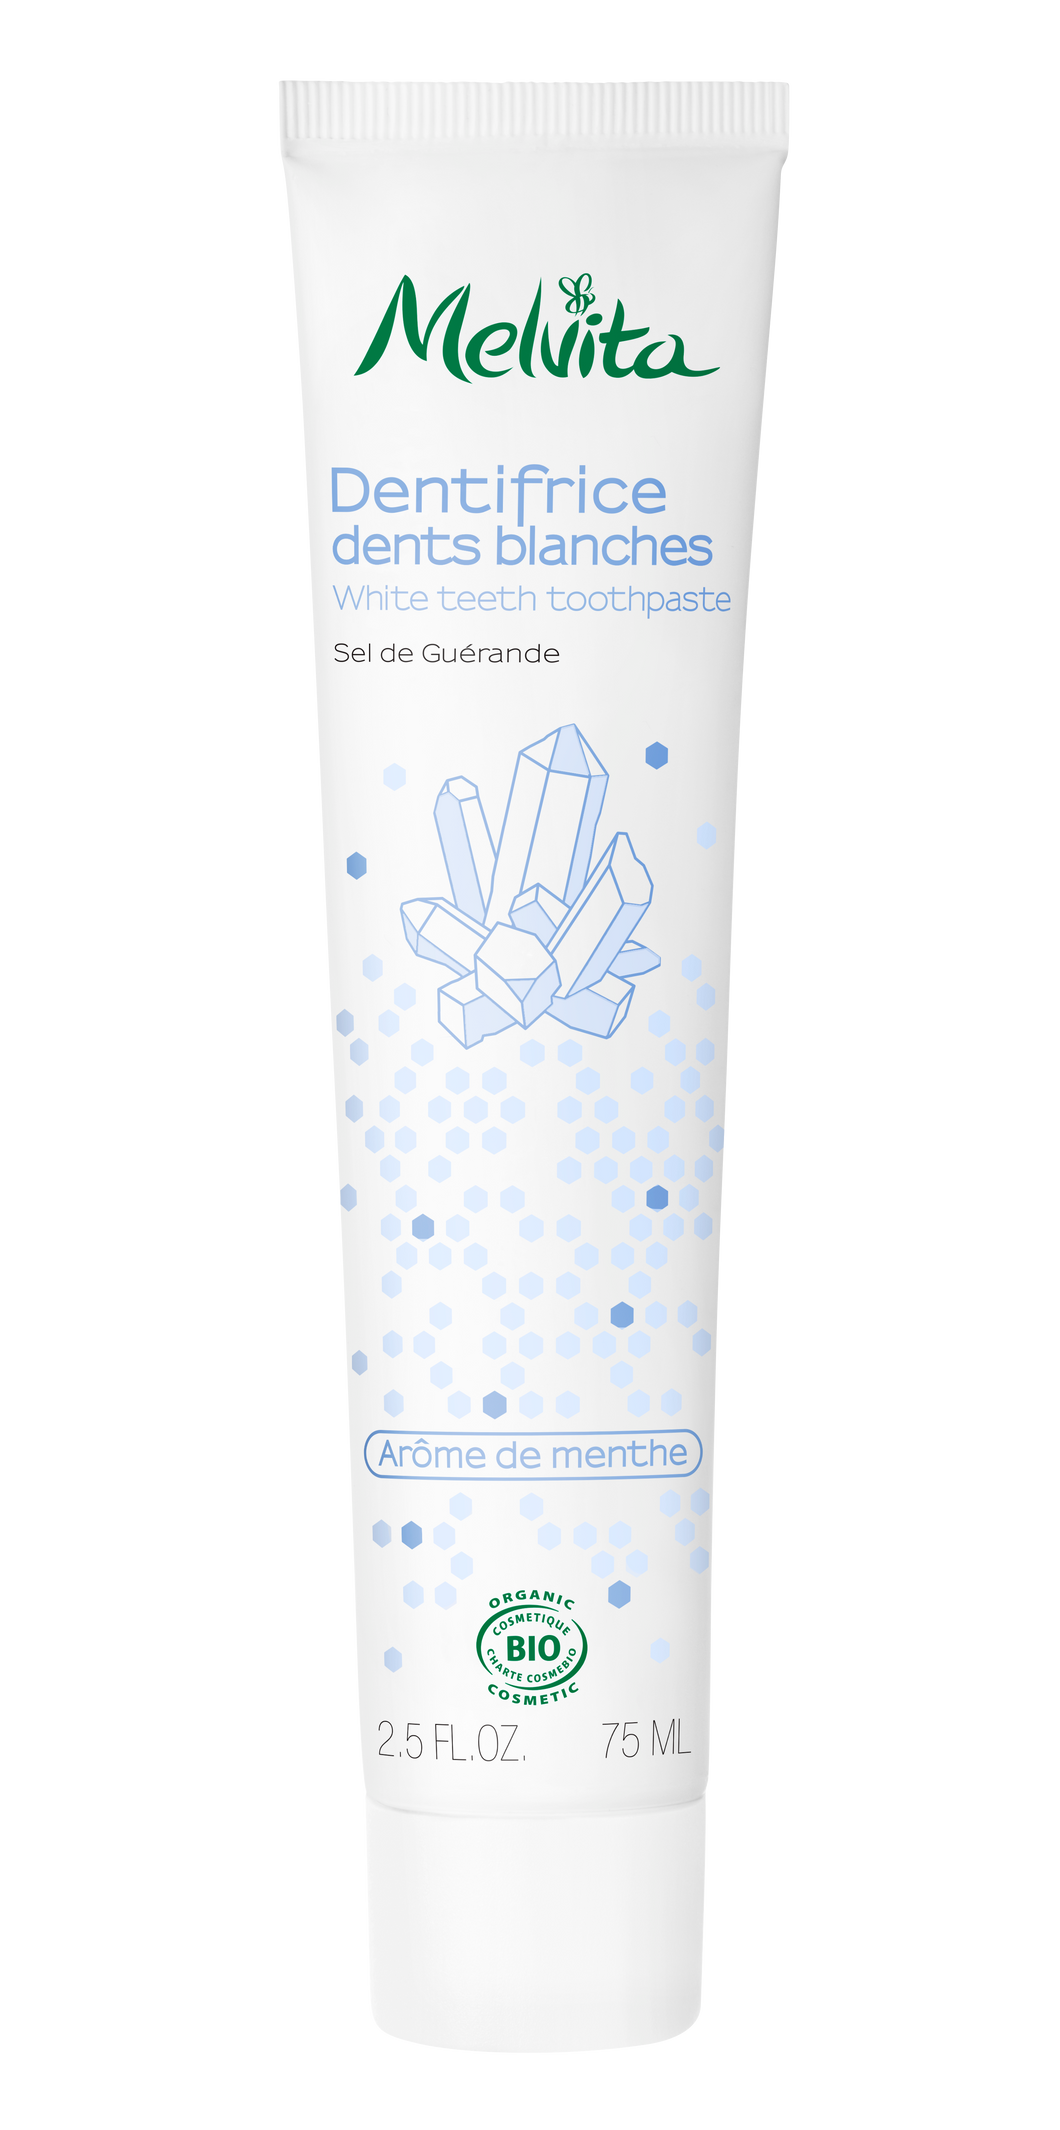 Dentifrice dents blanches